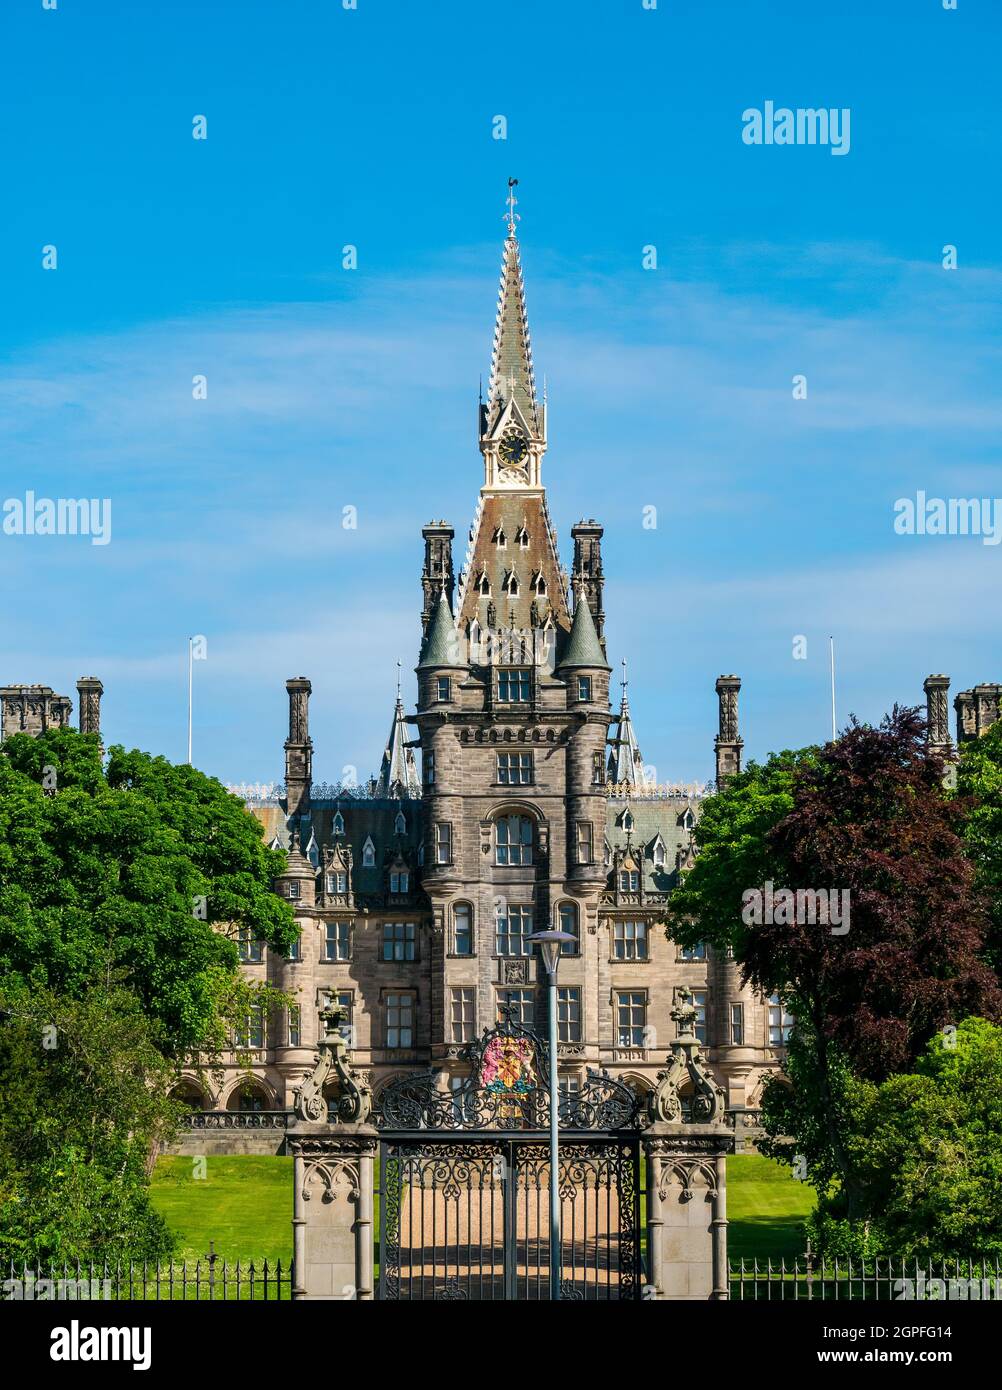 Scots baronial style Fettes College independent school building by David Bryce on sunny day with ornate wrought iron gate, Edinburgh, Scotland, UK Stock Photo